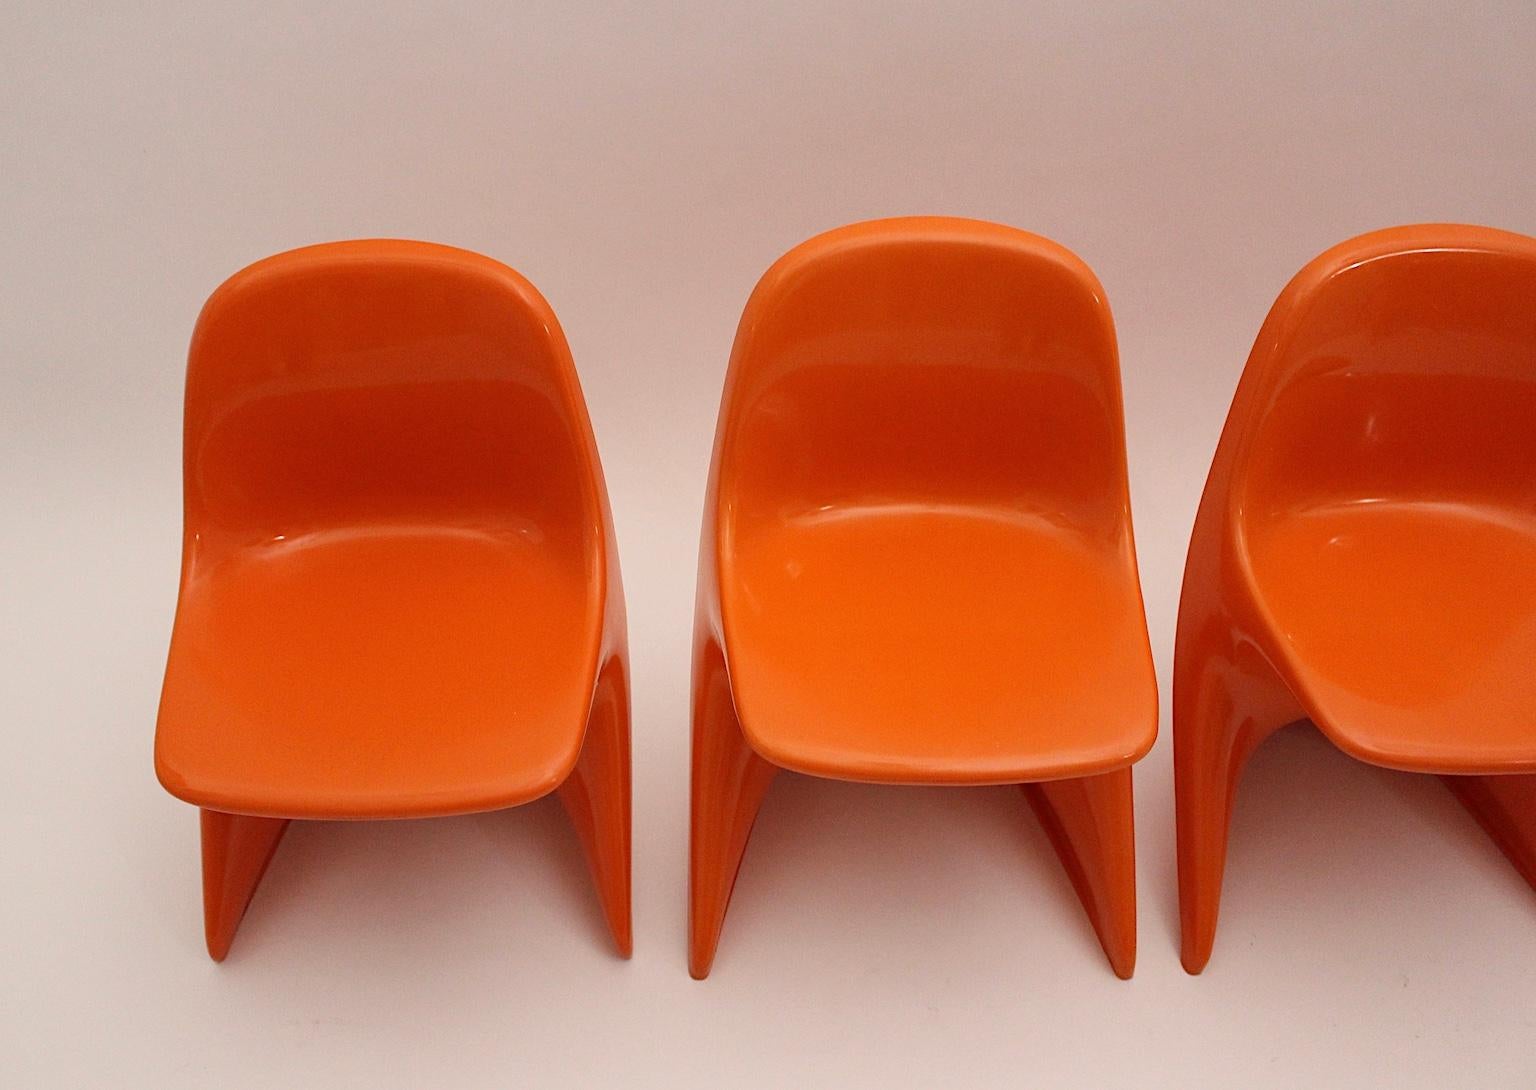 Space Age Plastic Four Vintage Orange Children Stacking Chairs 1970s Casalino For Sale 13